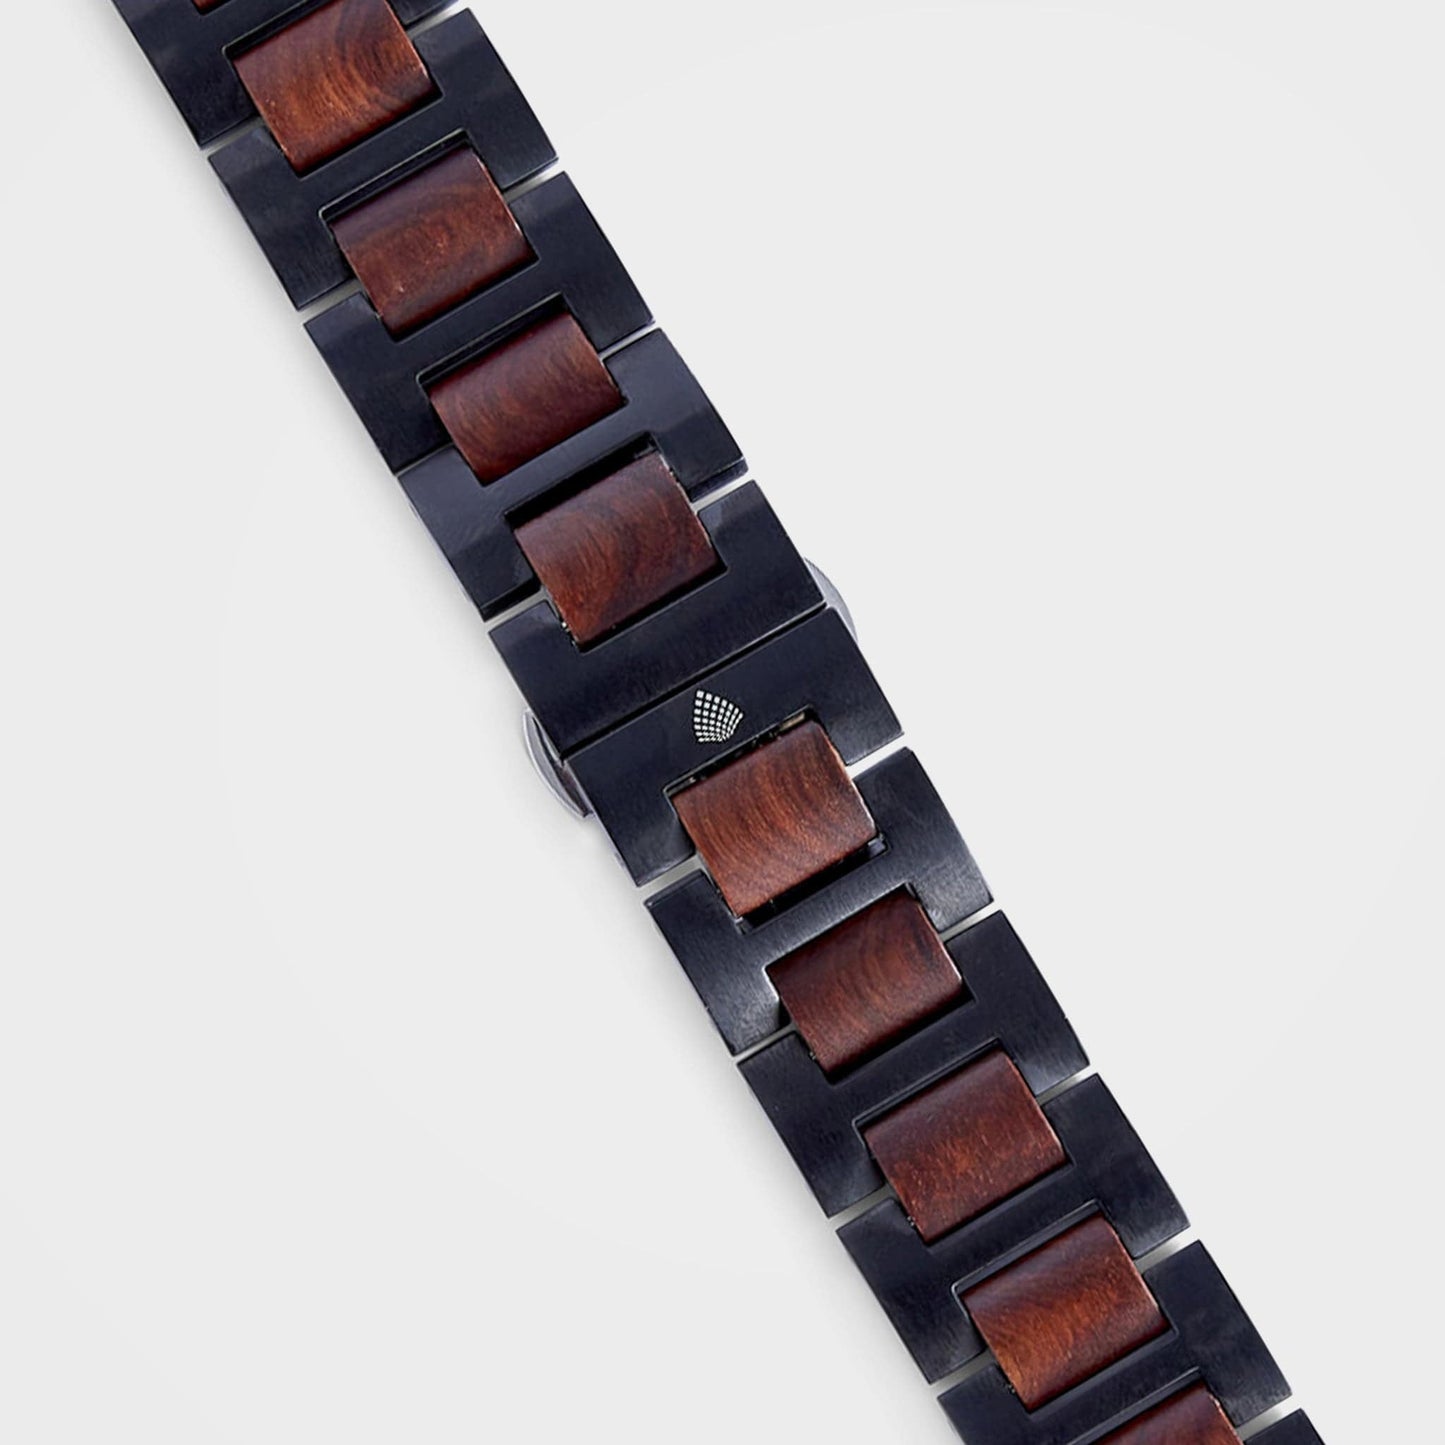 Handmade Natural Wood Apple Watch Strap: The Cherry